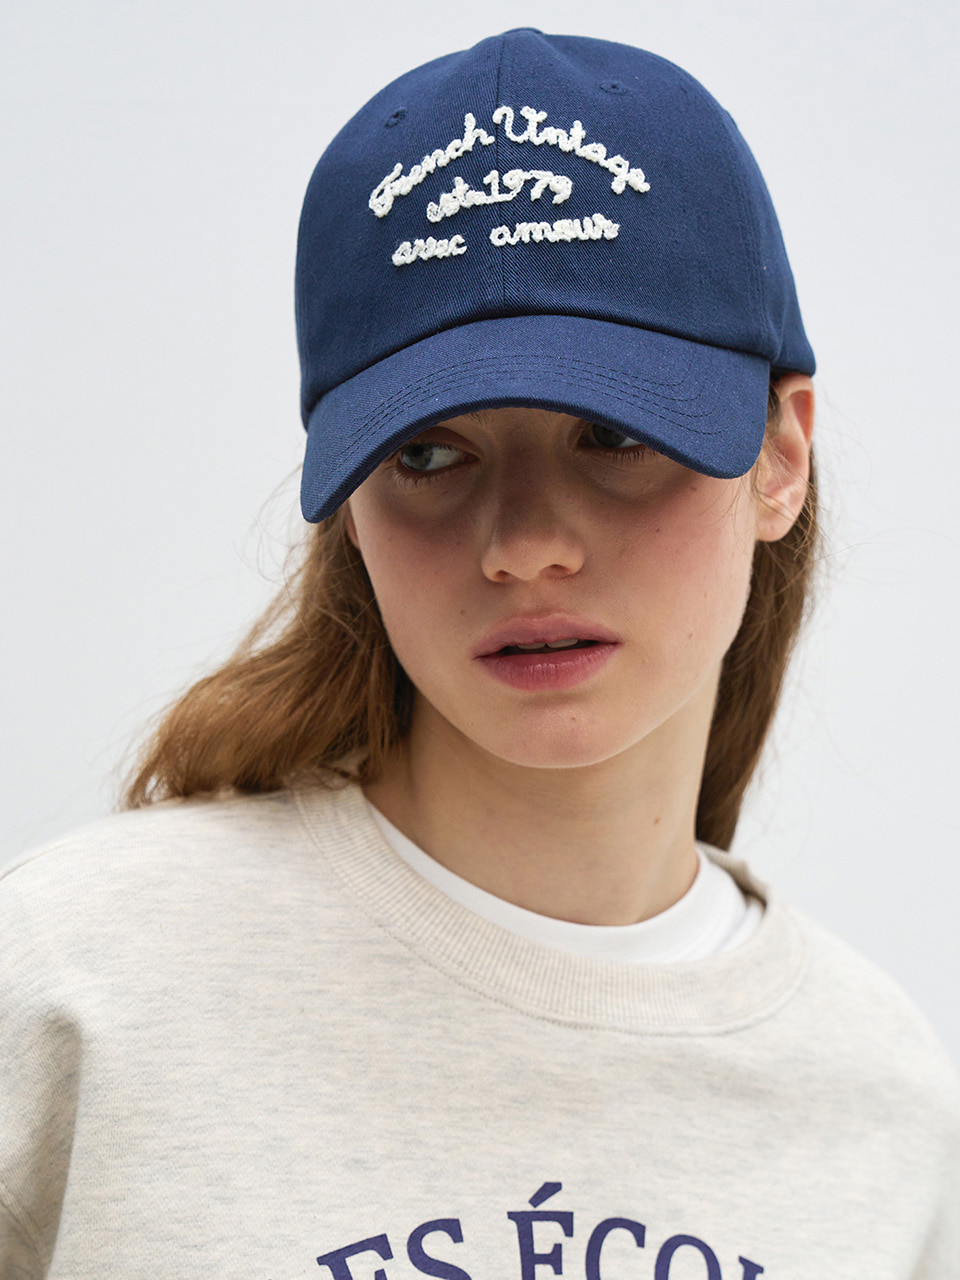 [24SS] FRENCH EMBROIDERY LOGO BALL CAP - NAVY